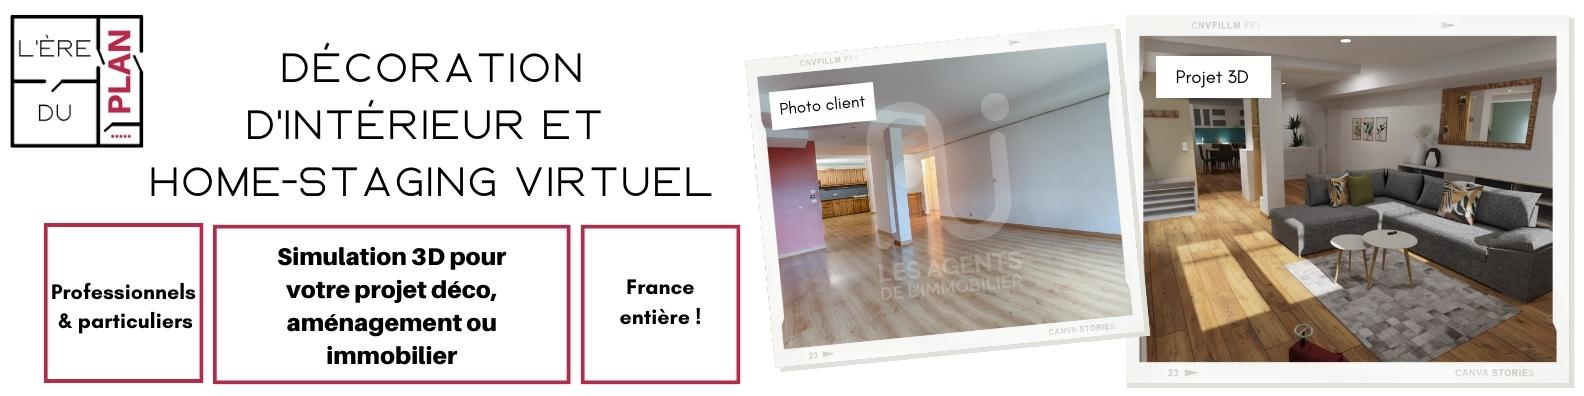 agencement virtuel immobilier